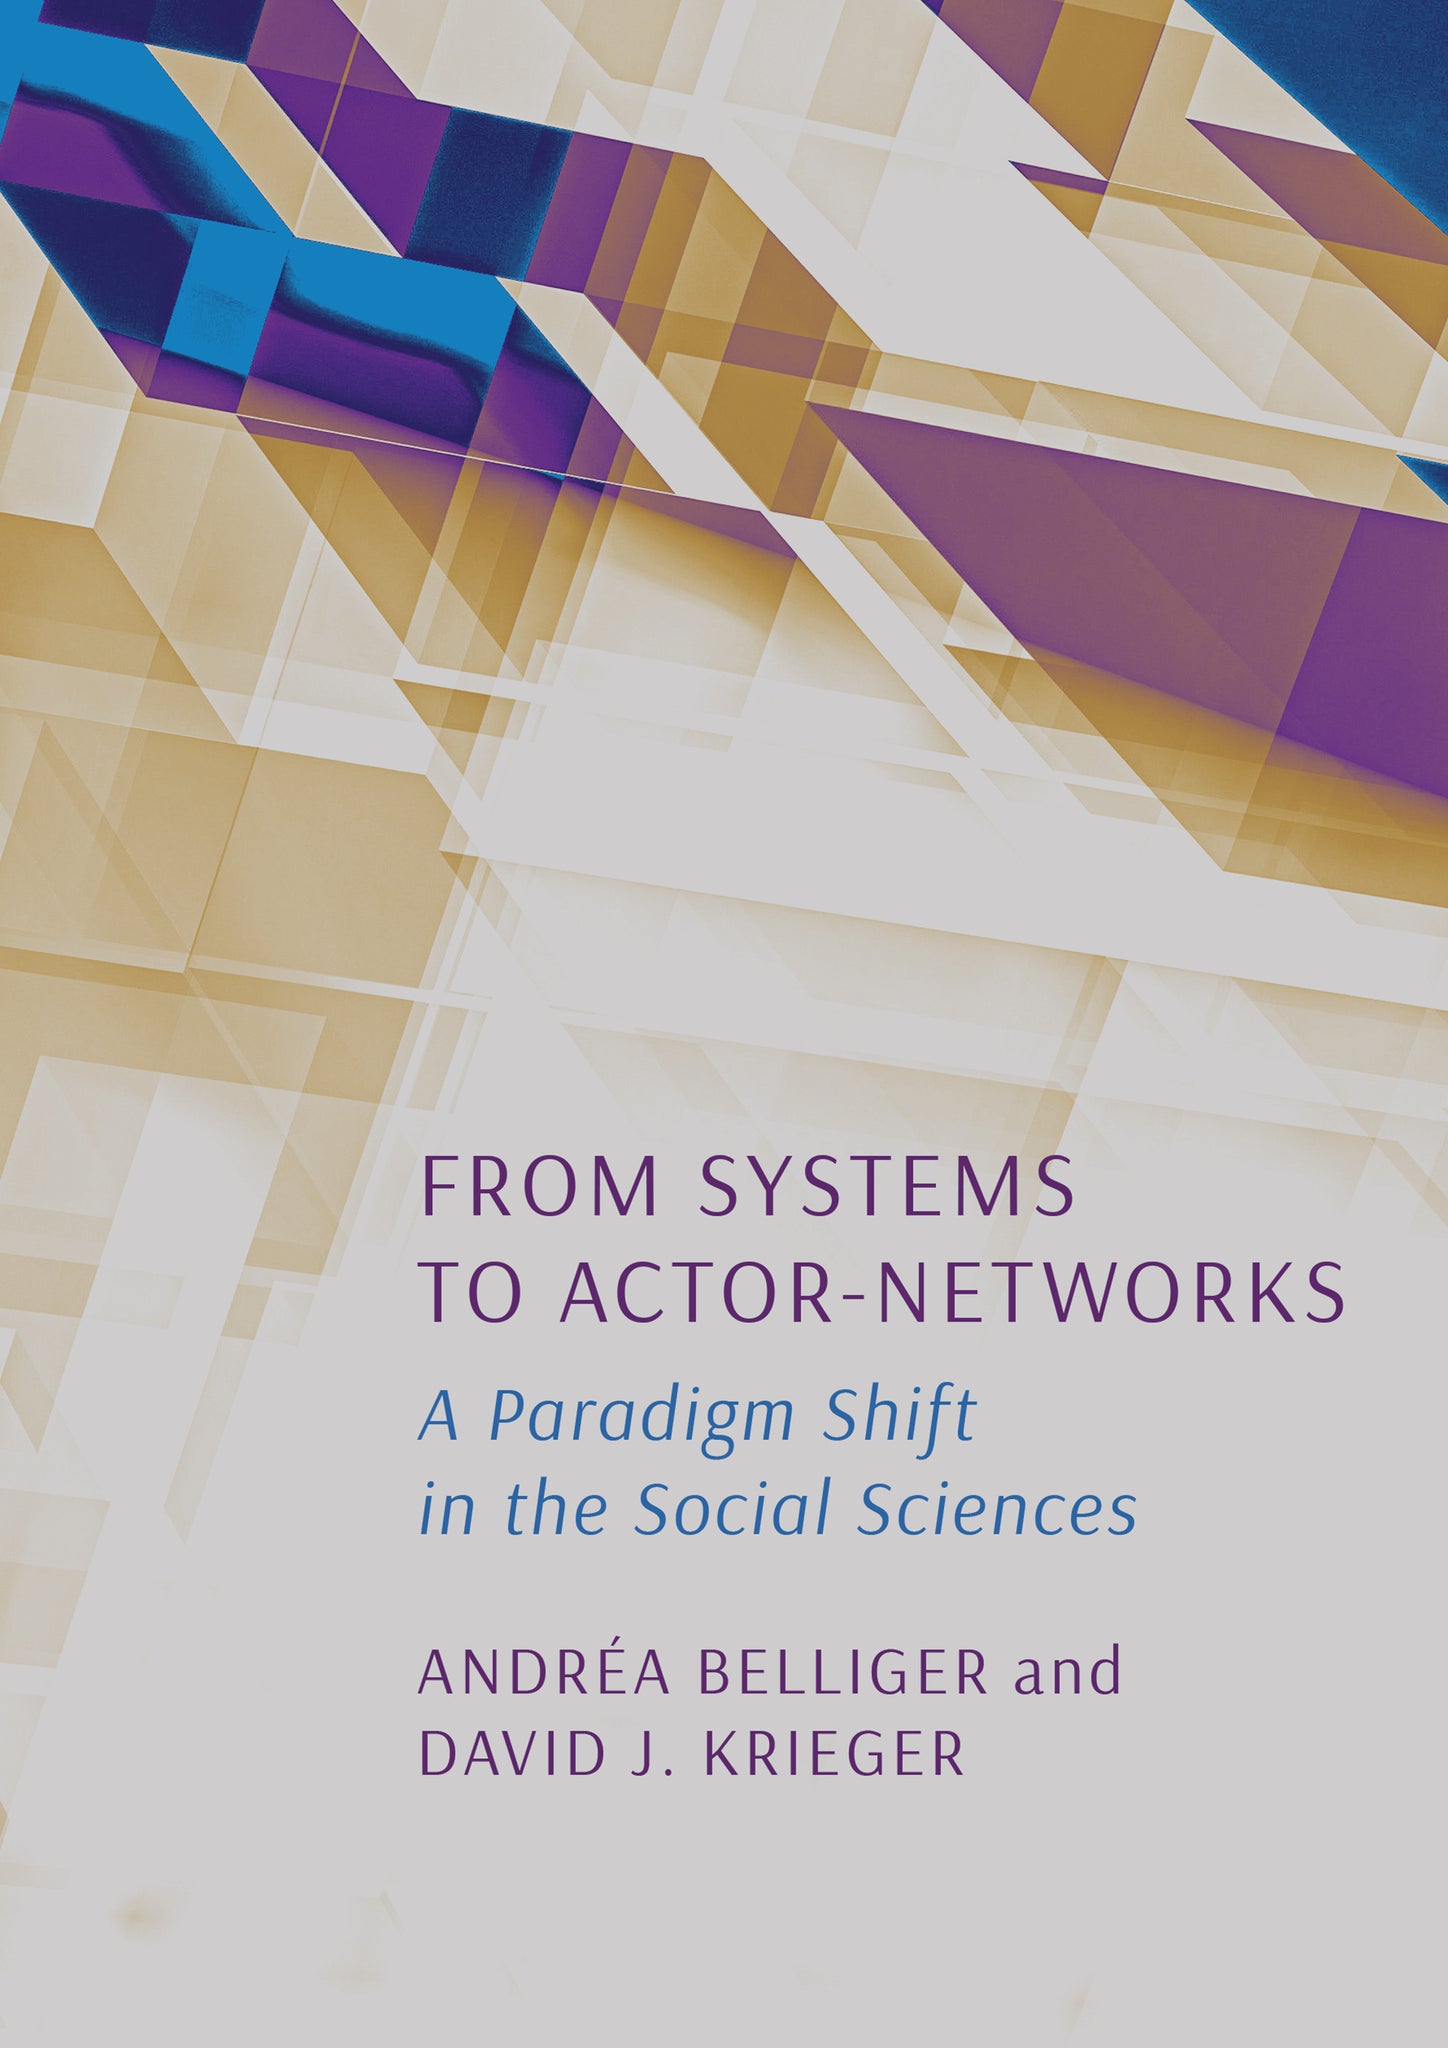 From Systems to Actor-Networks: A Paradigm Shift in the Social Sciences